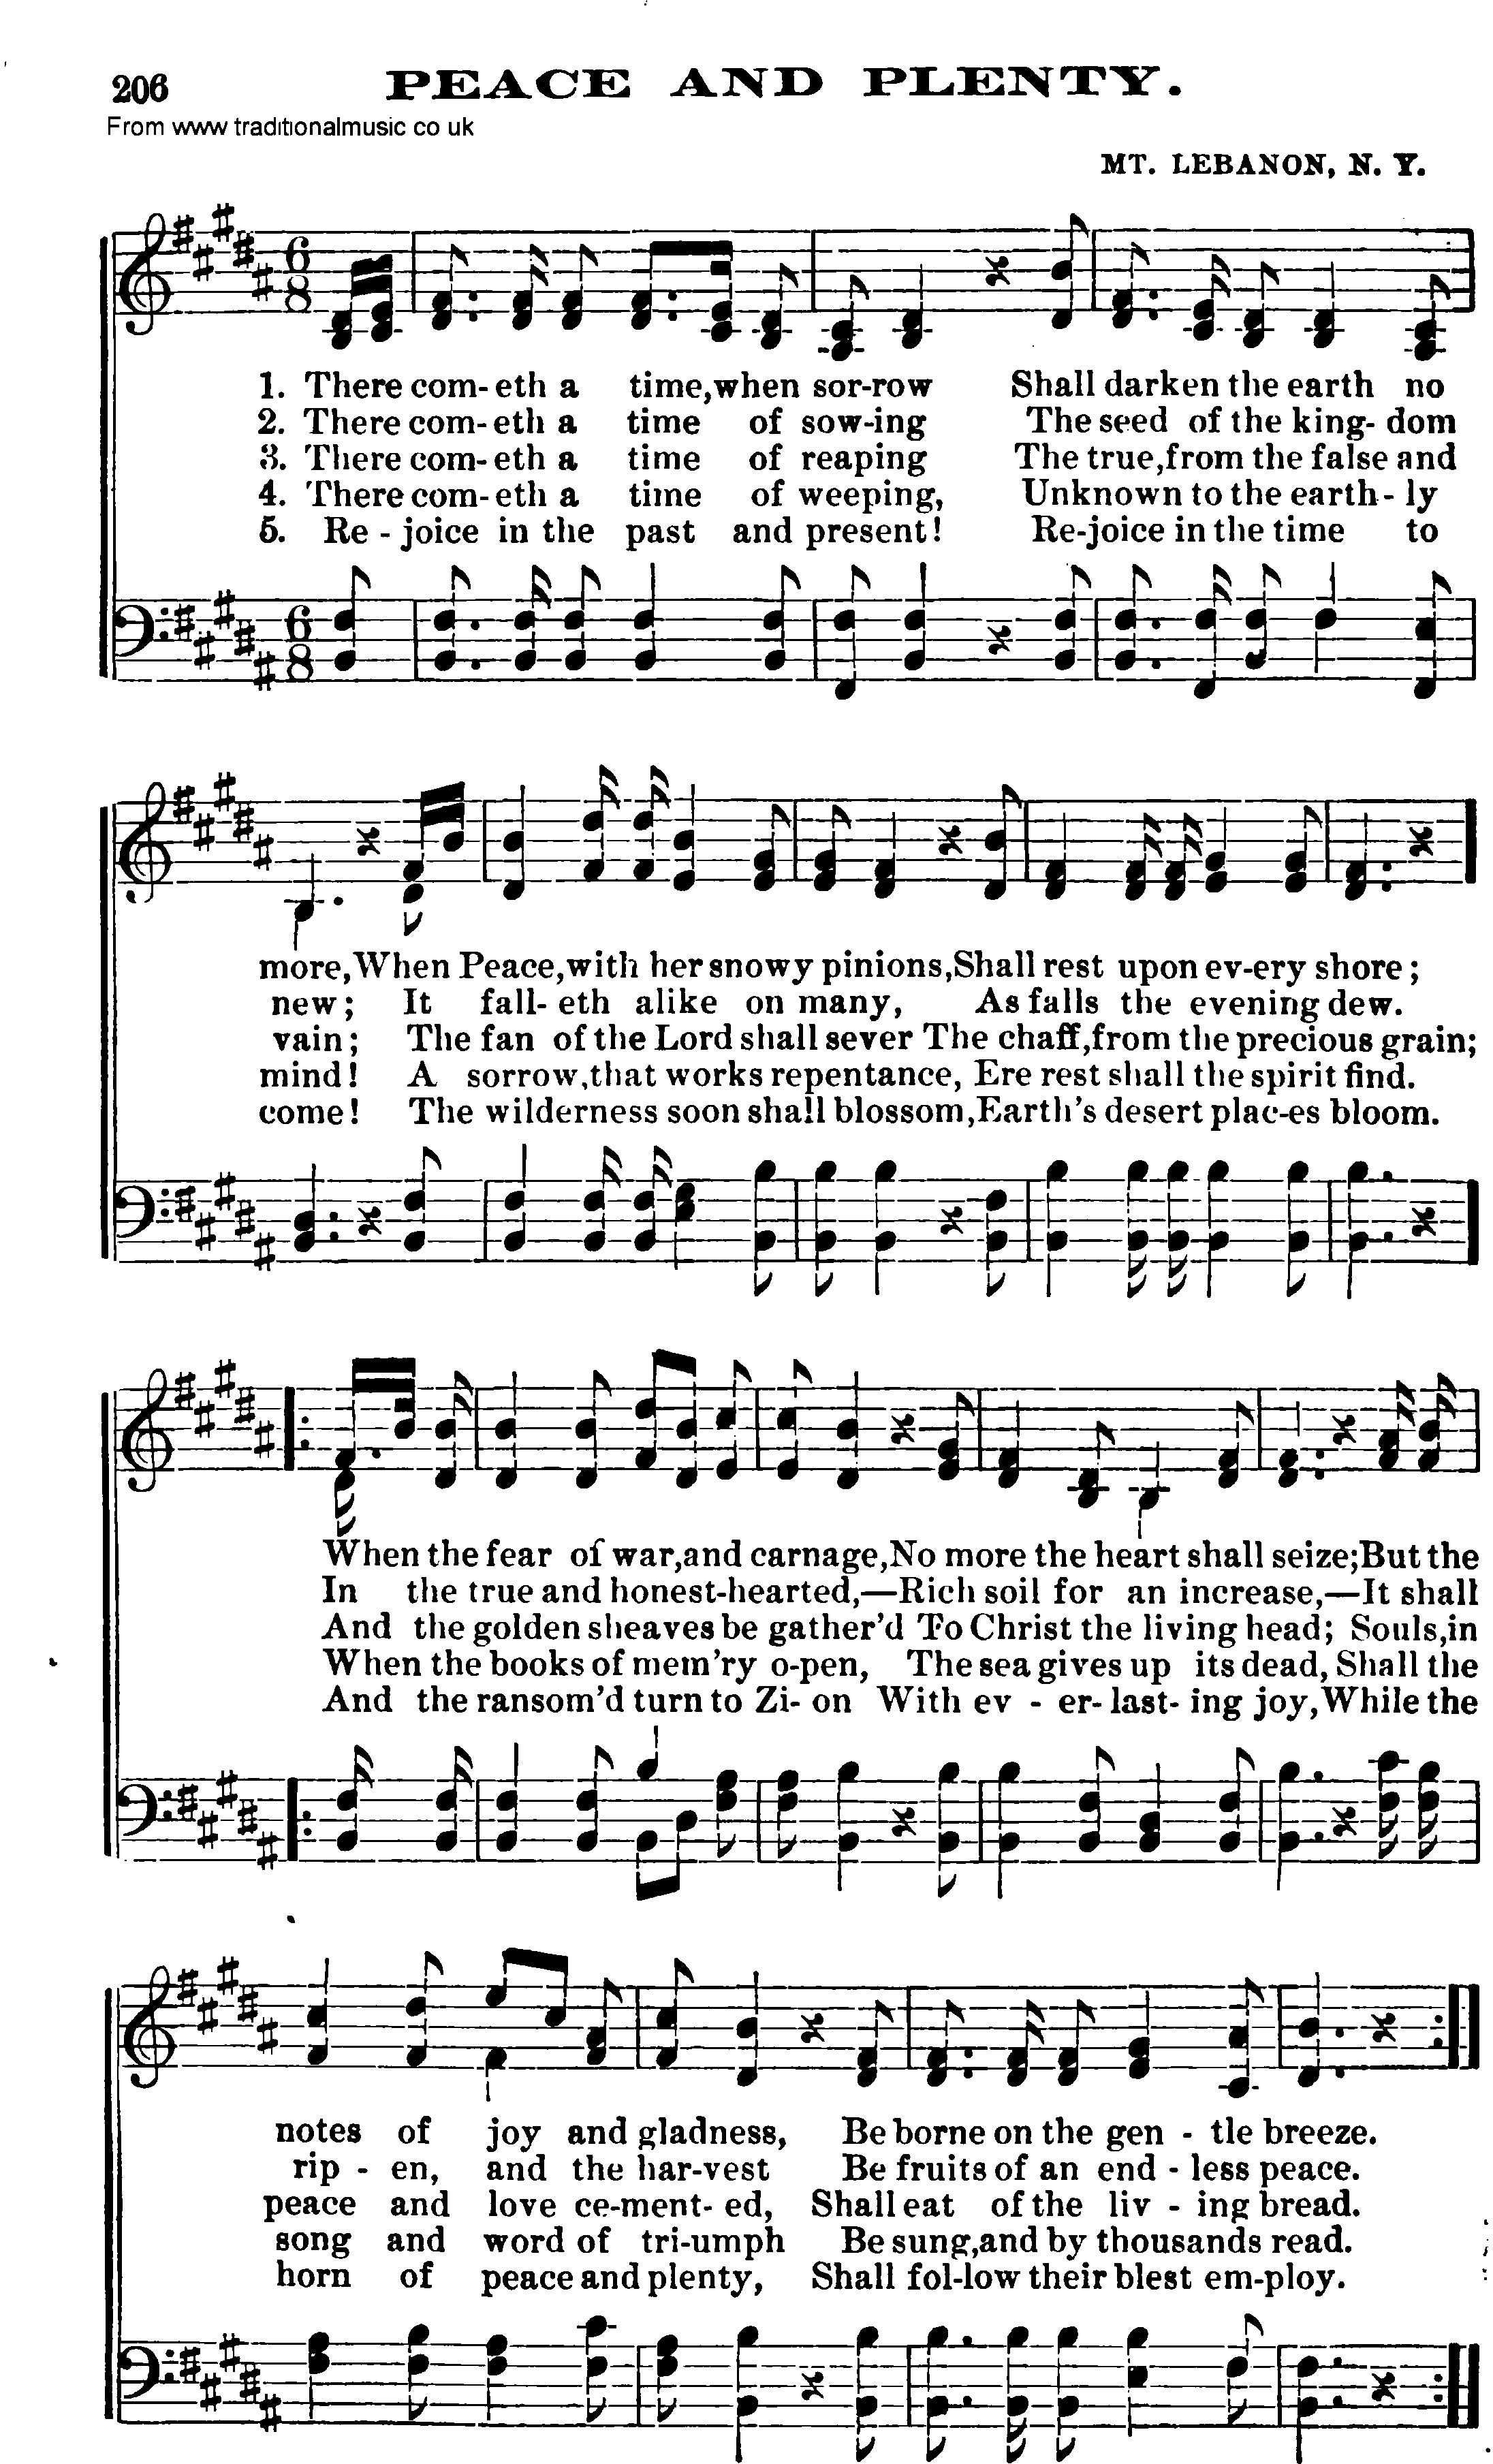 Shaker Music collection, Hymn: Peace And Plenty, sheetmusic and PDF